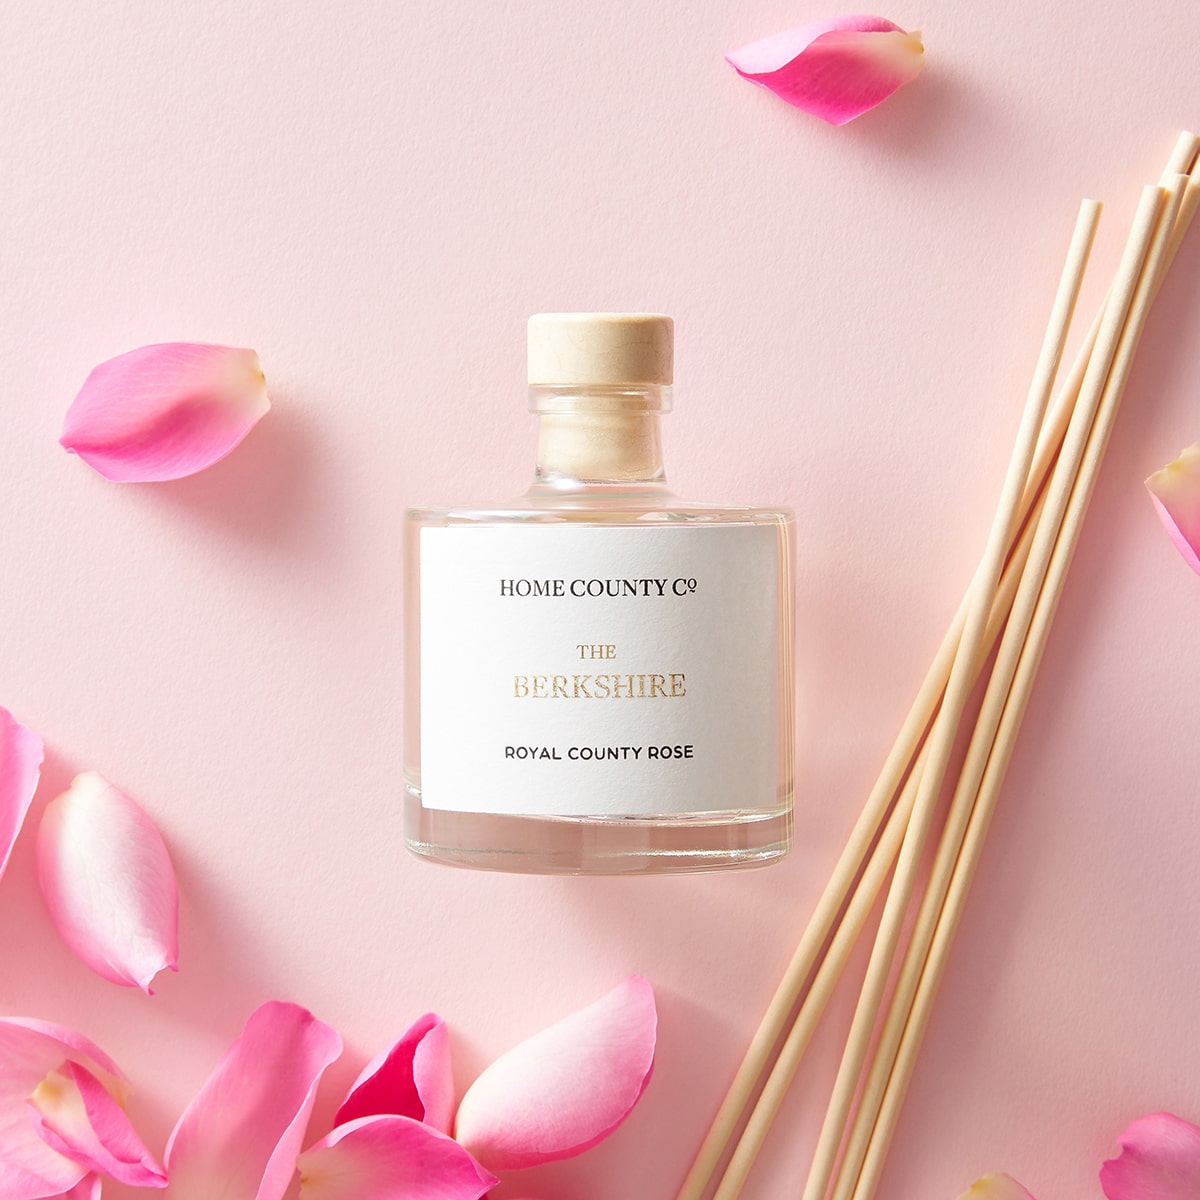 A Berkshire county rose scented reed diffuser from the Home County Co. is shown next to fresh pink rose petals and porex reeds